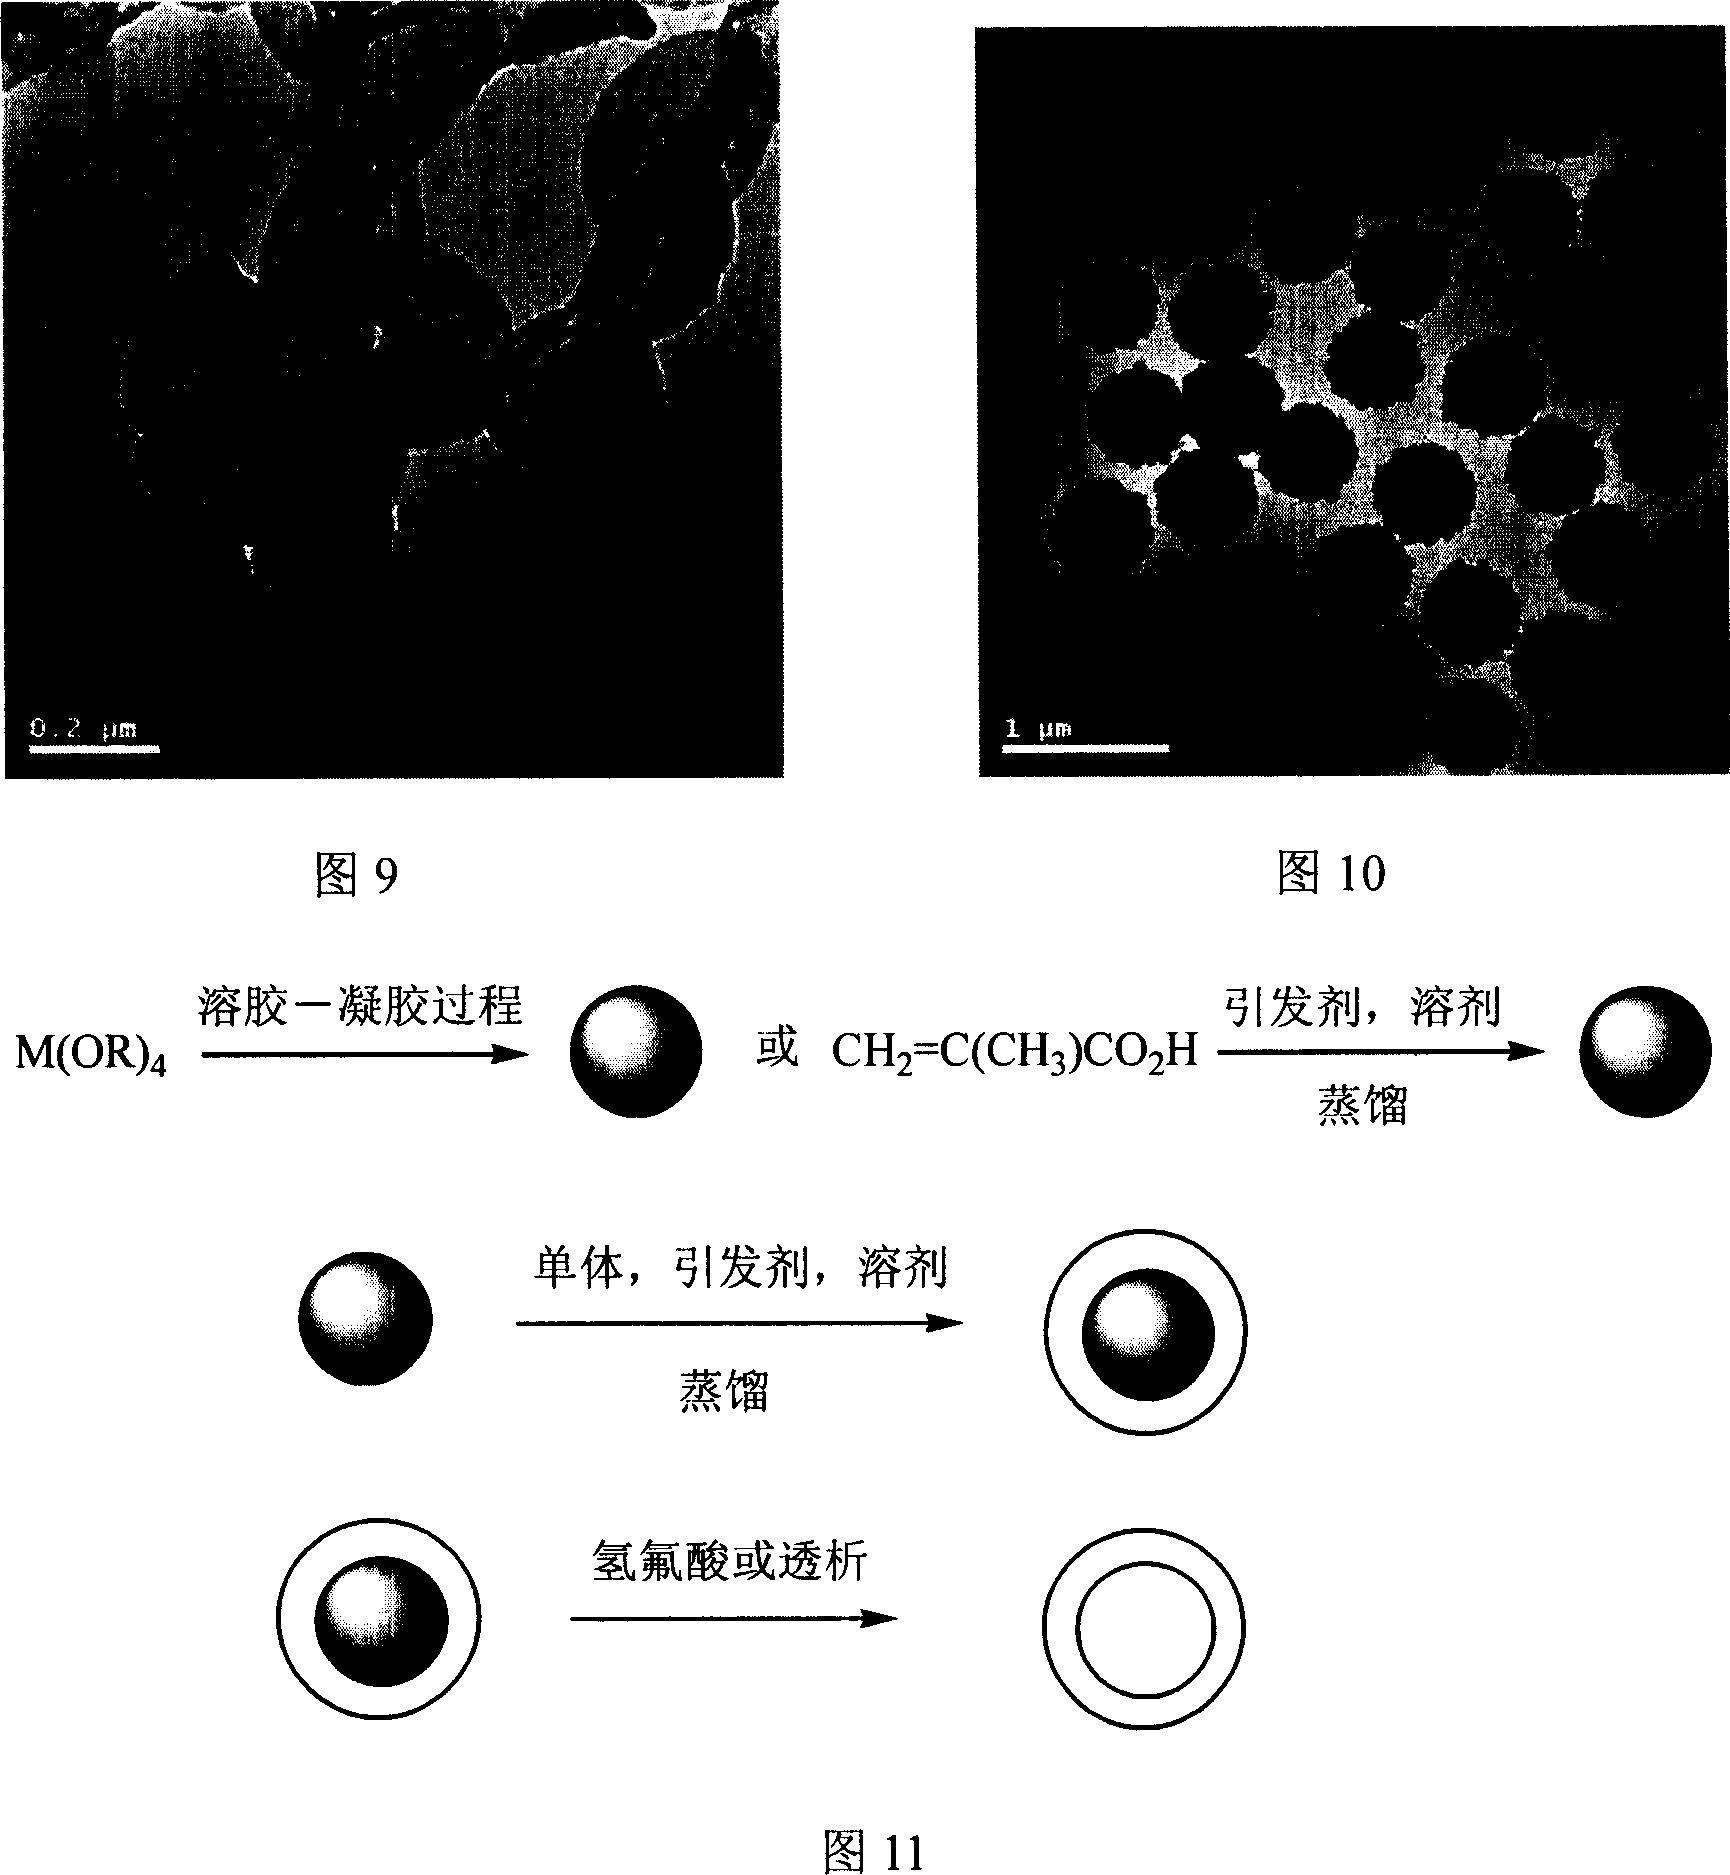 Mono-dispersed nano/micron polymer hollow microsphere resin and method for synthesizing the same